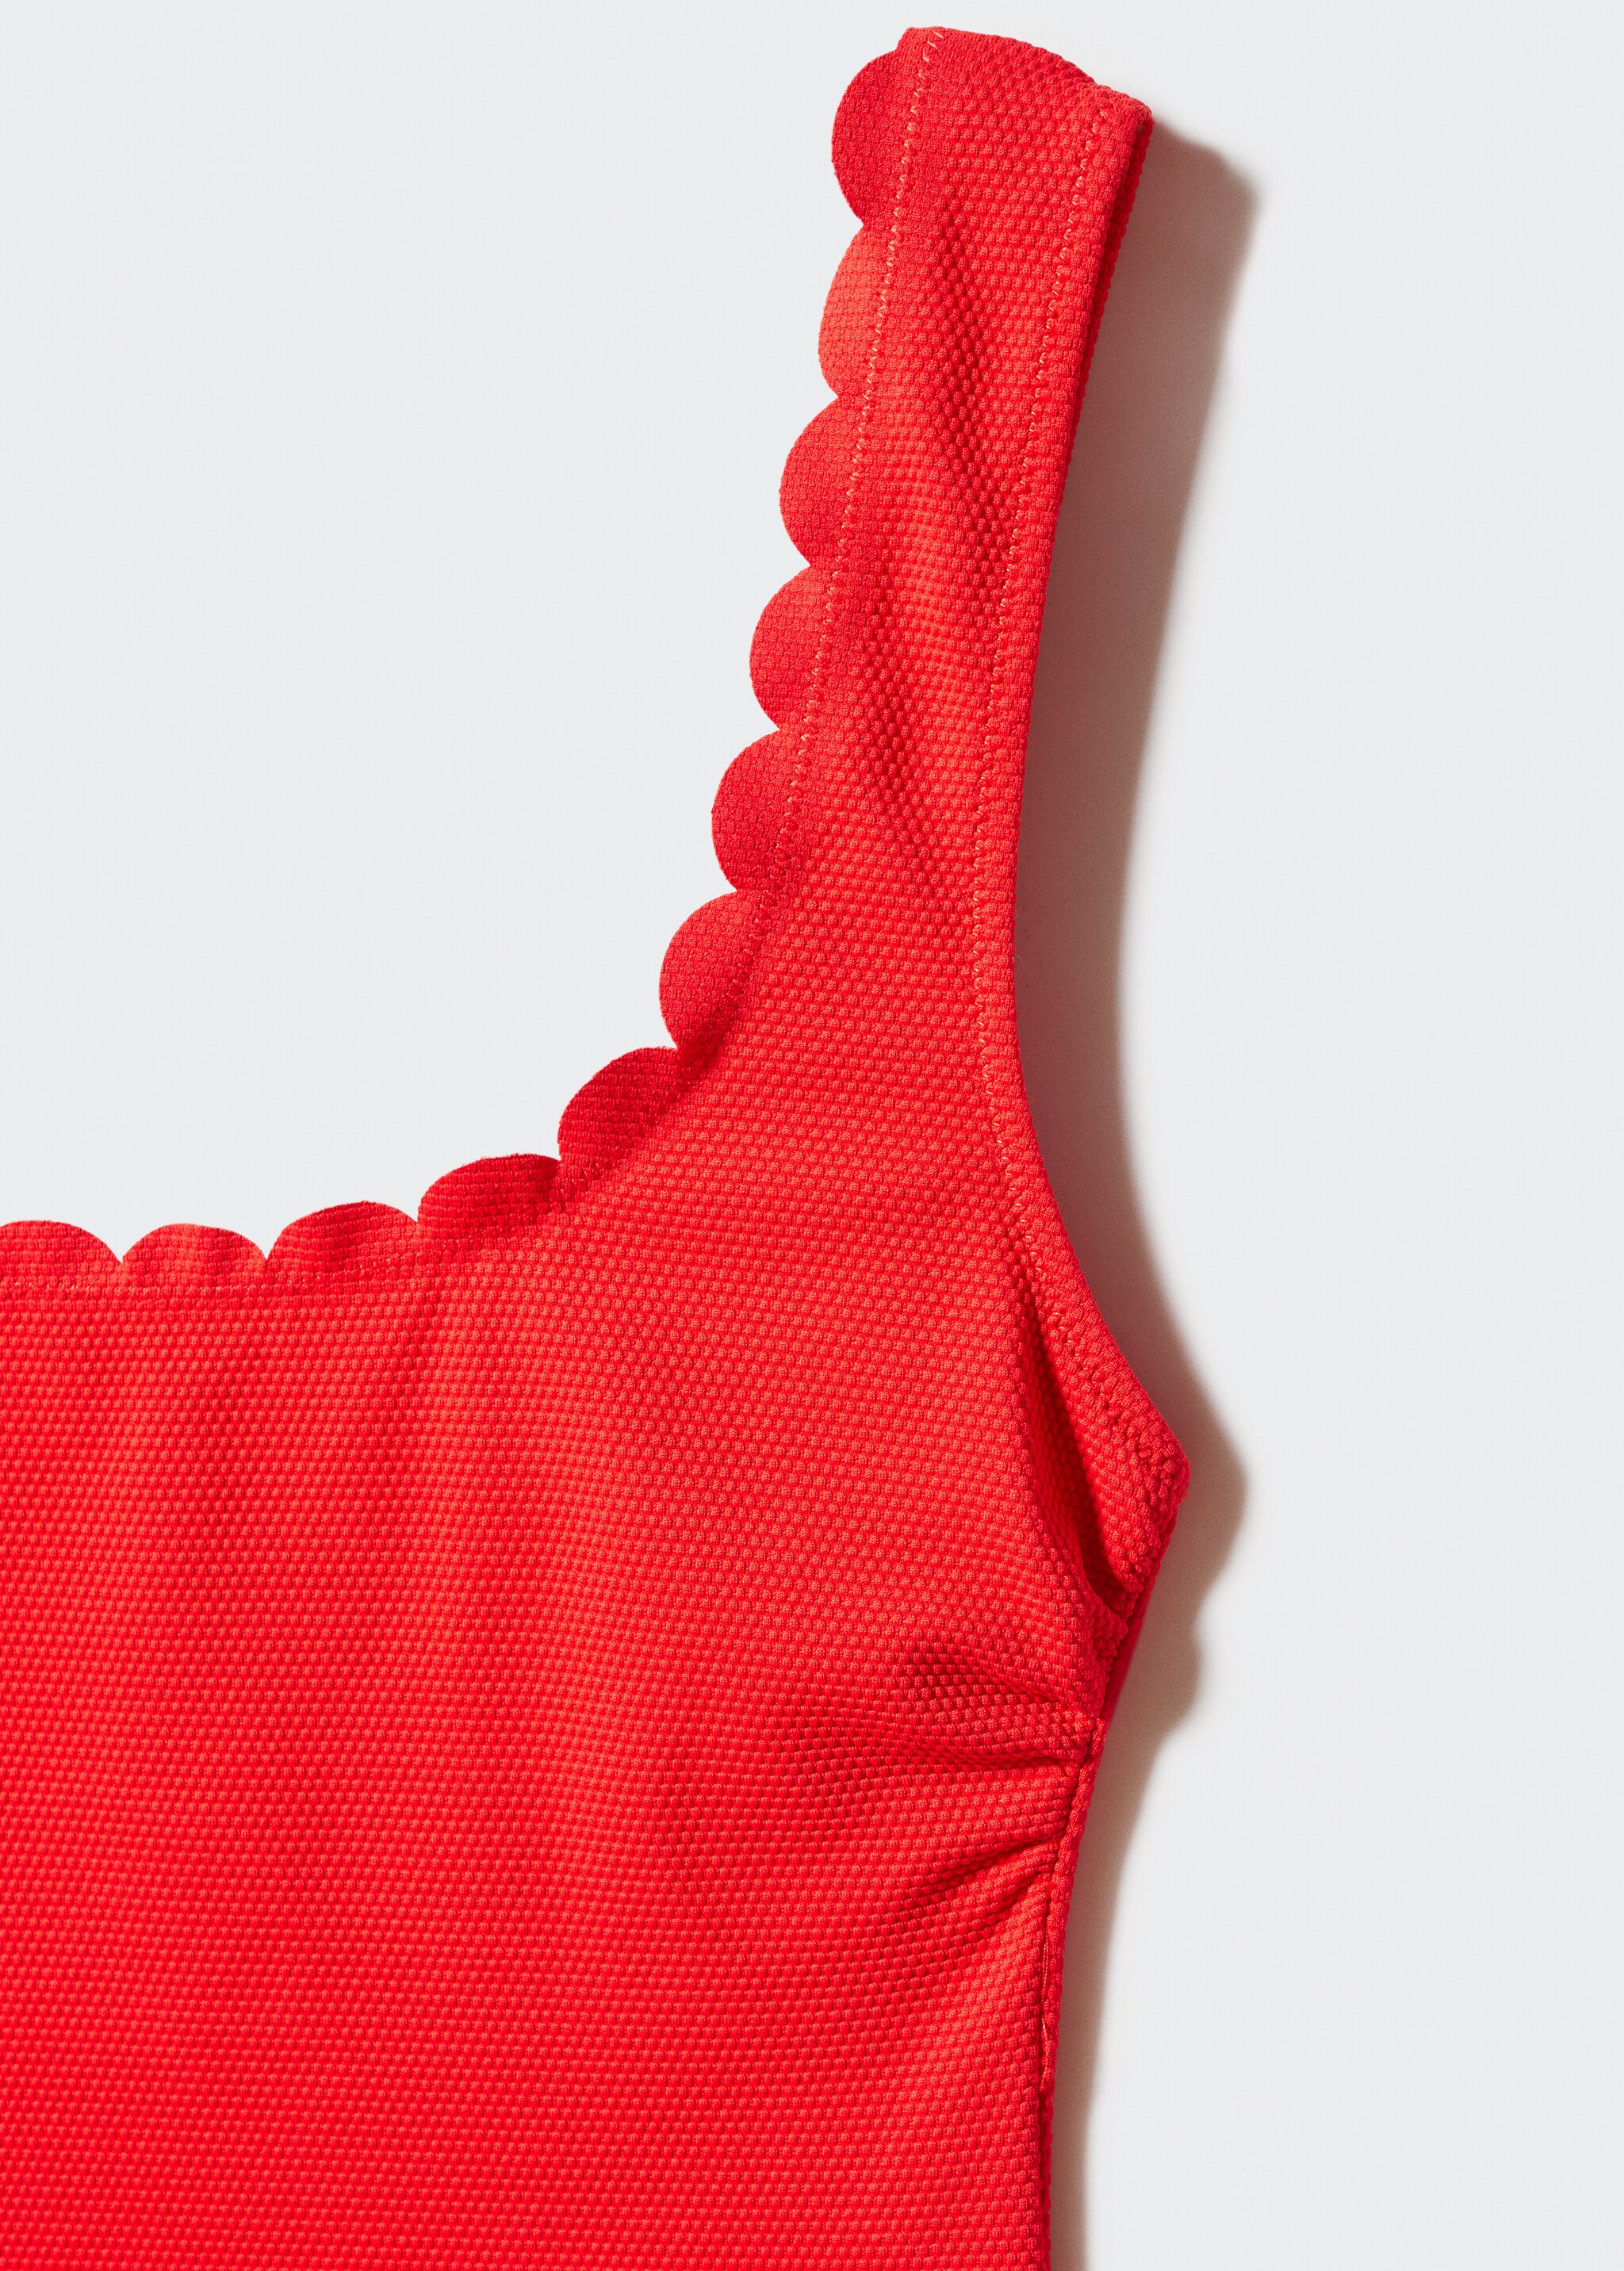 Scallop-textured swimsuit - Details of the article 8